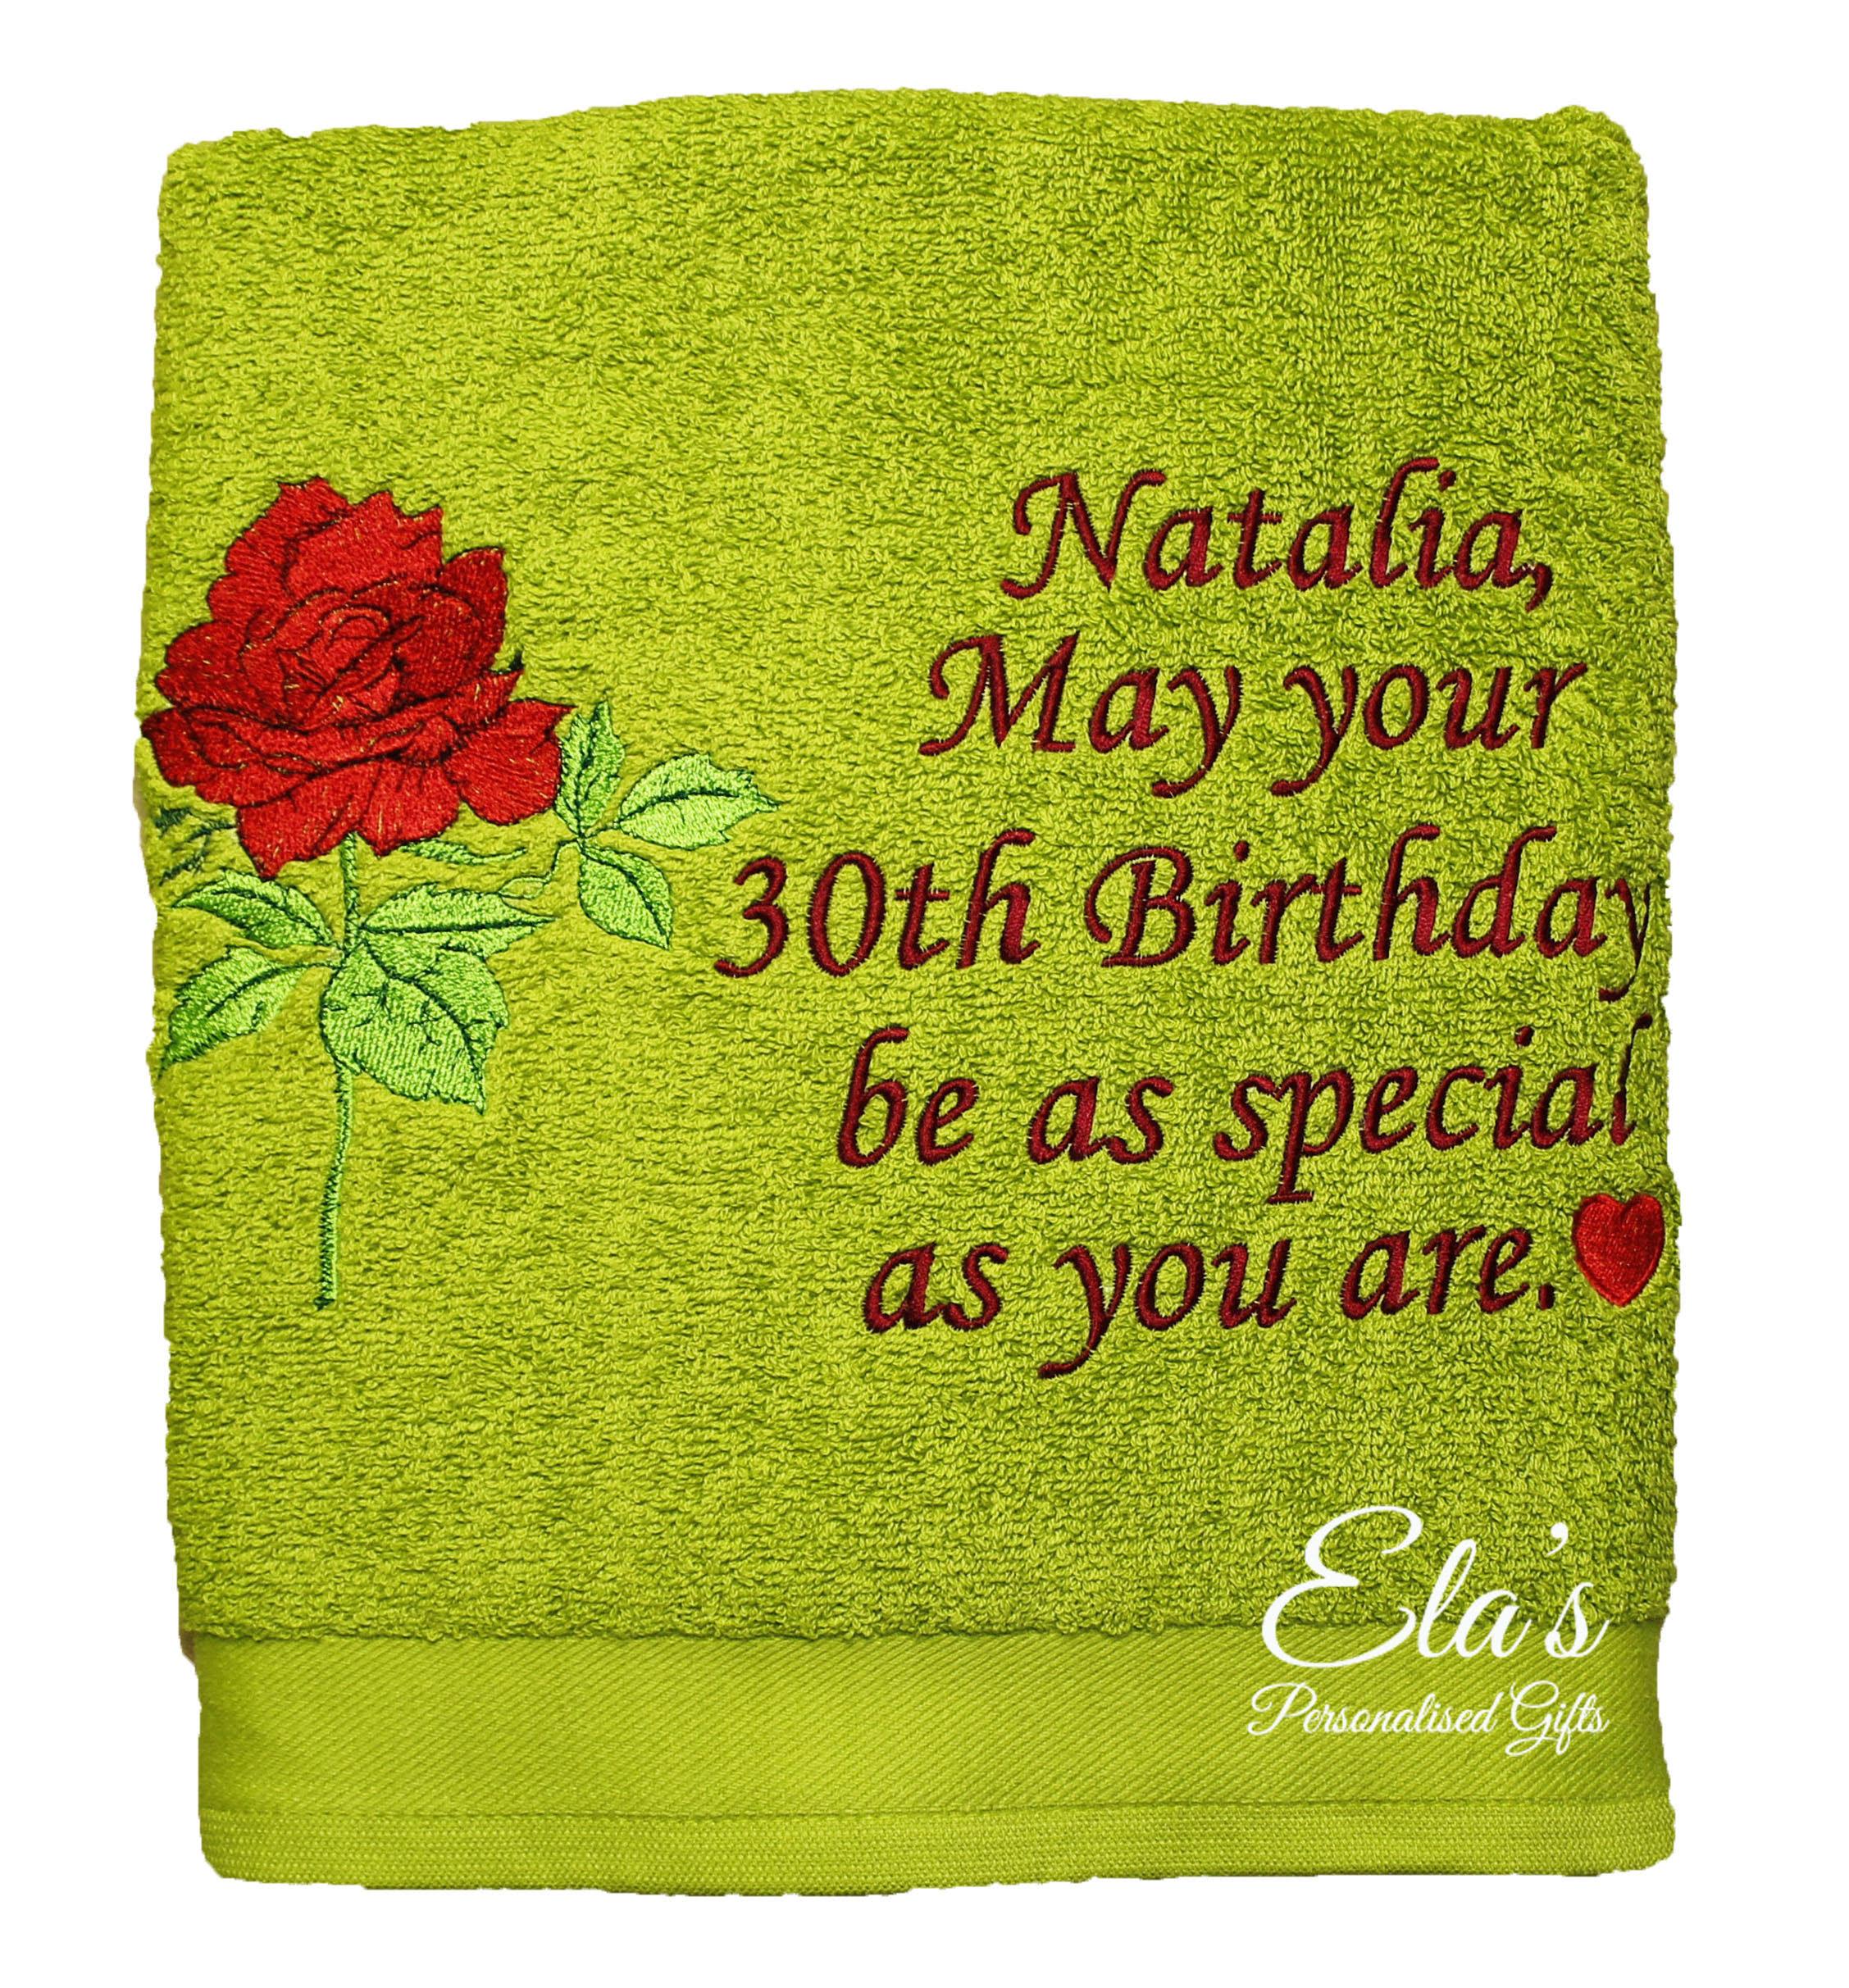 Embroidered towel with red rose design